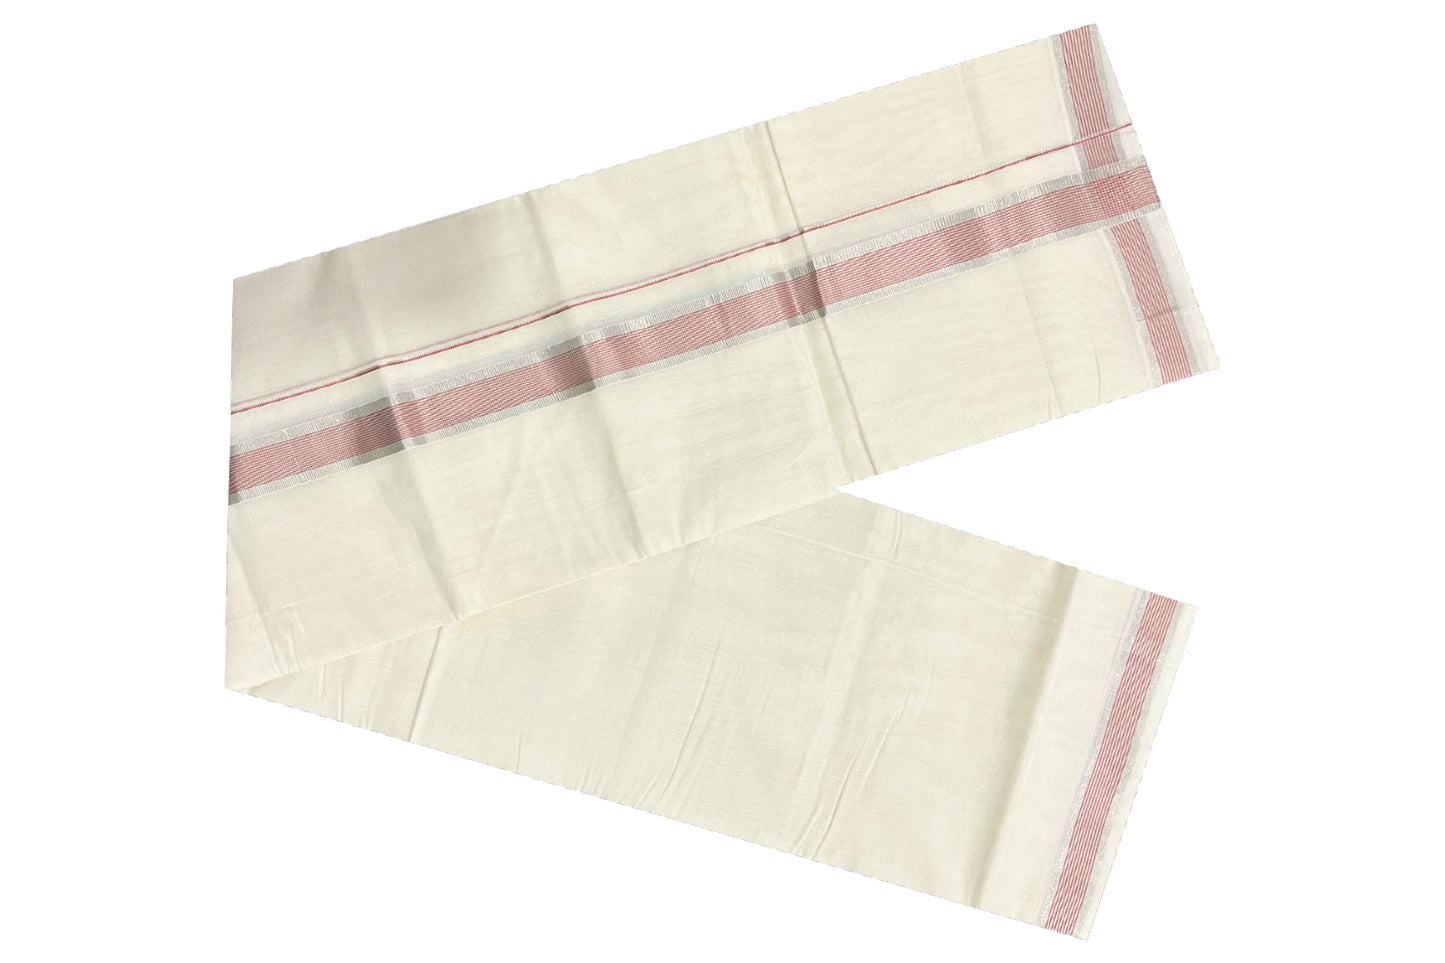 Southloom Kuthampully Pure Cotton Handloom Mundu with Silver and Red Kasavu Lines Border